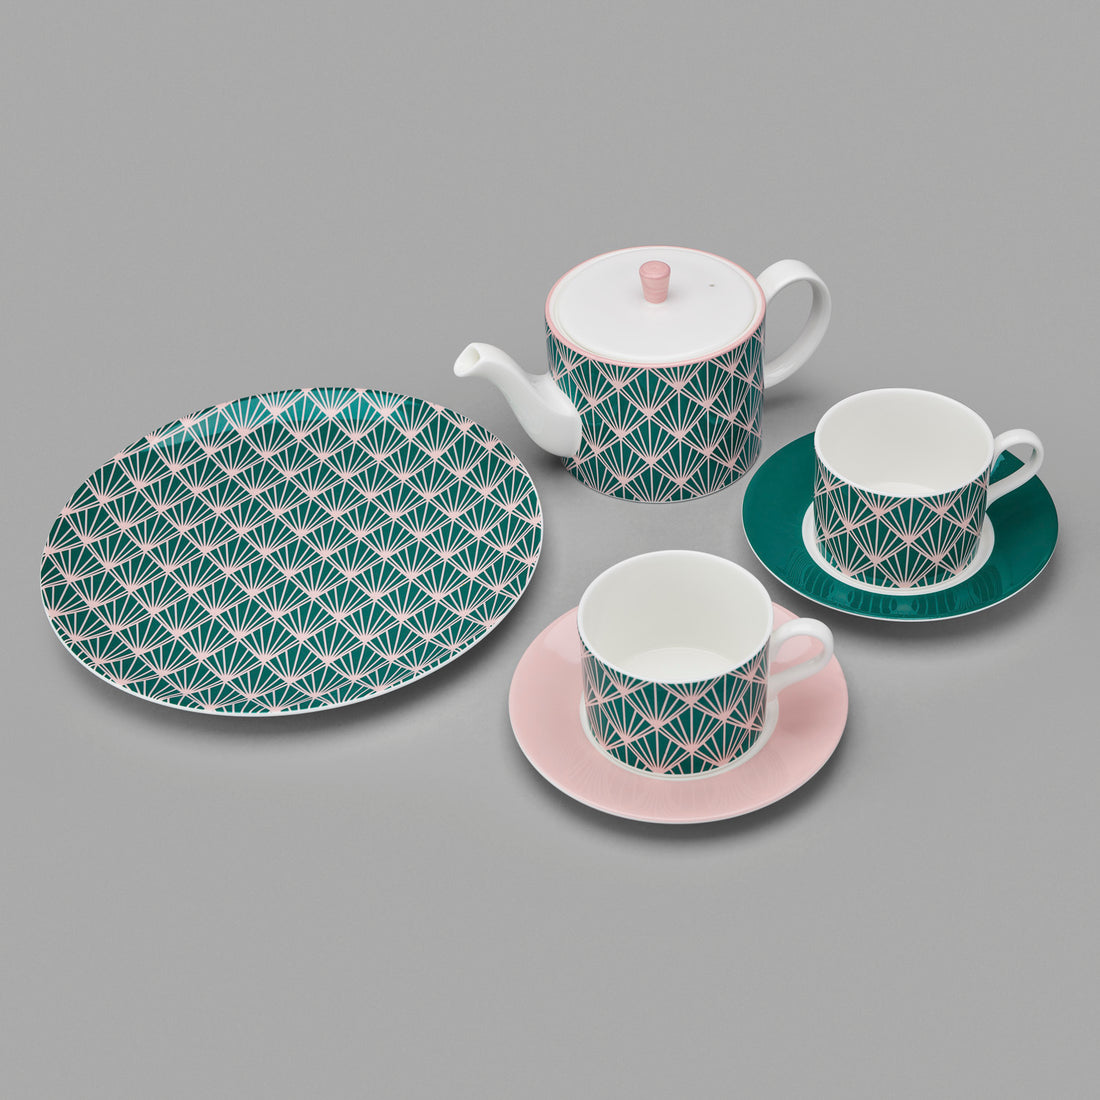 Zighy II Cup and Saucer in Teal and Blush [Blush Saucer]